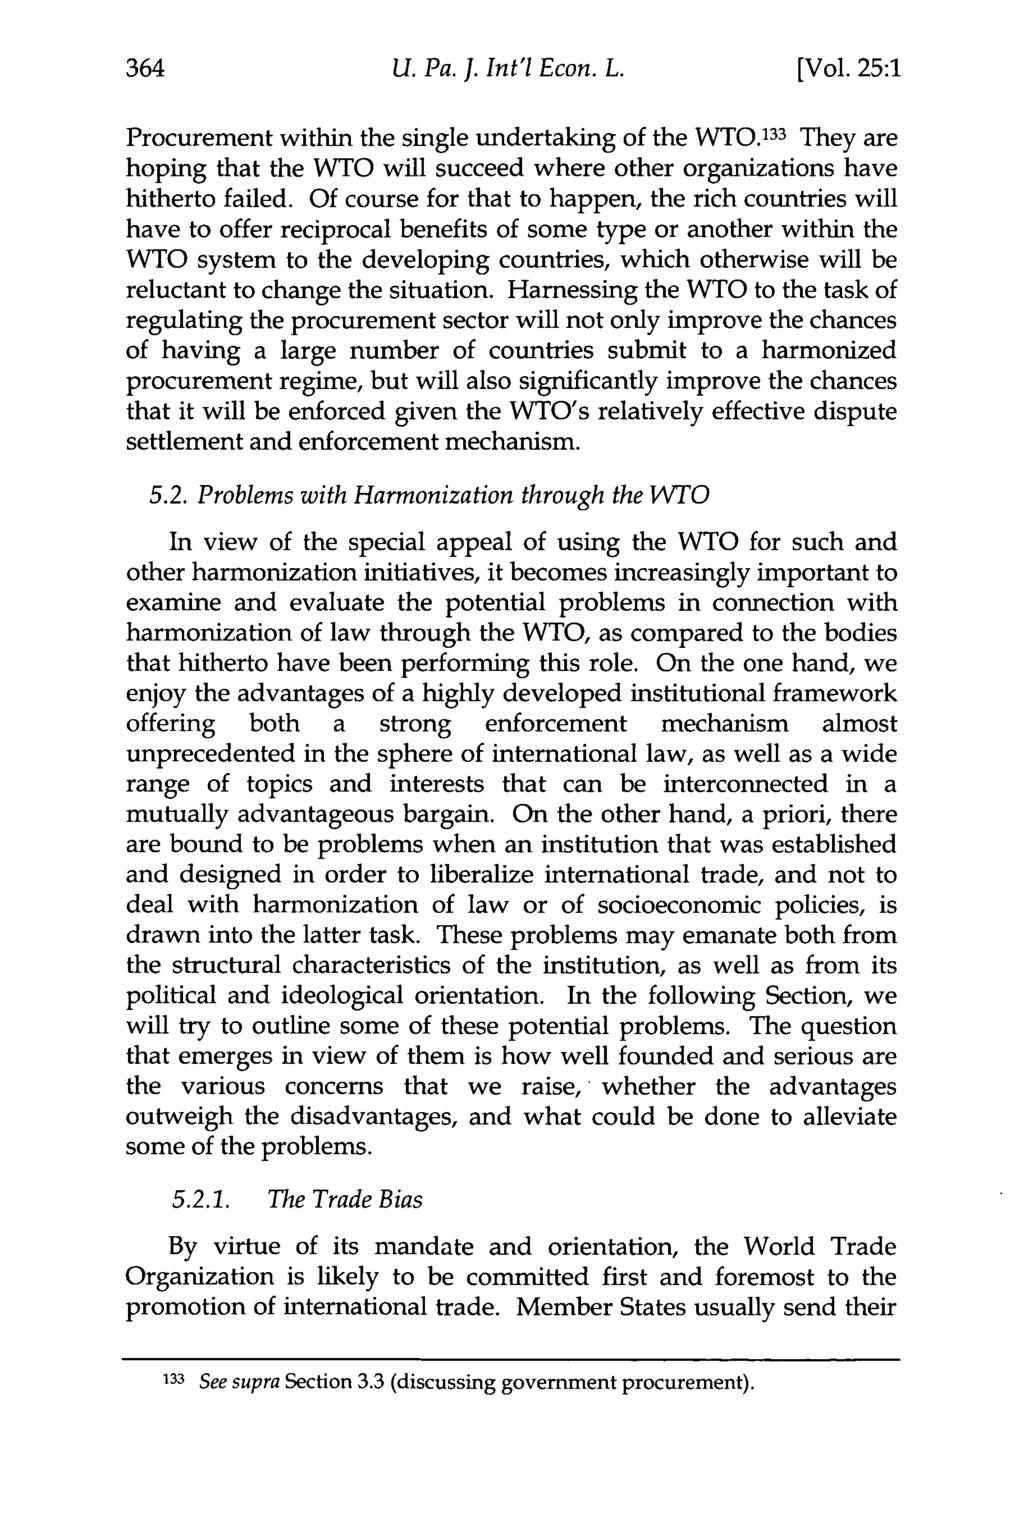 U. Pa. 1. Int'l Econ. L. [Vol. 25:1 Procurement within the single undertaking of the WTO. 133 They are hoping that the WTO will succeed where other organizations have hitherto failed.